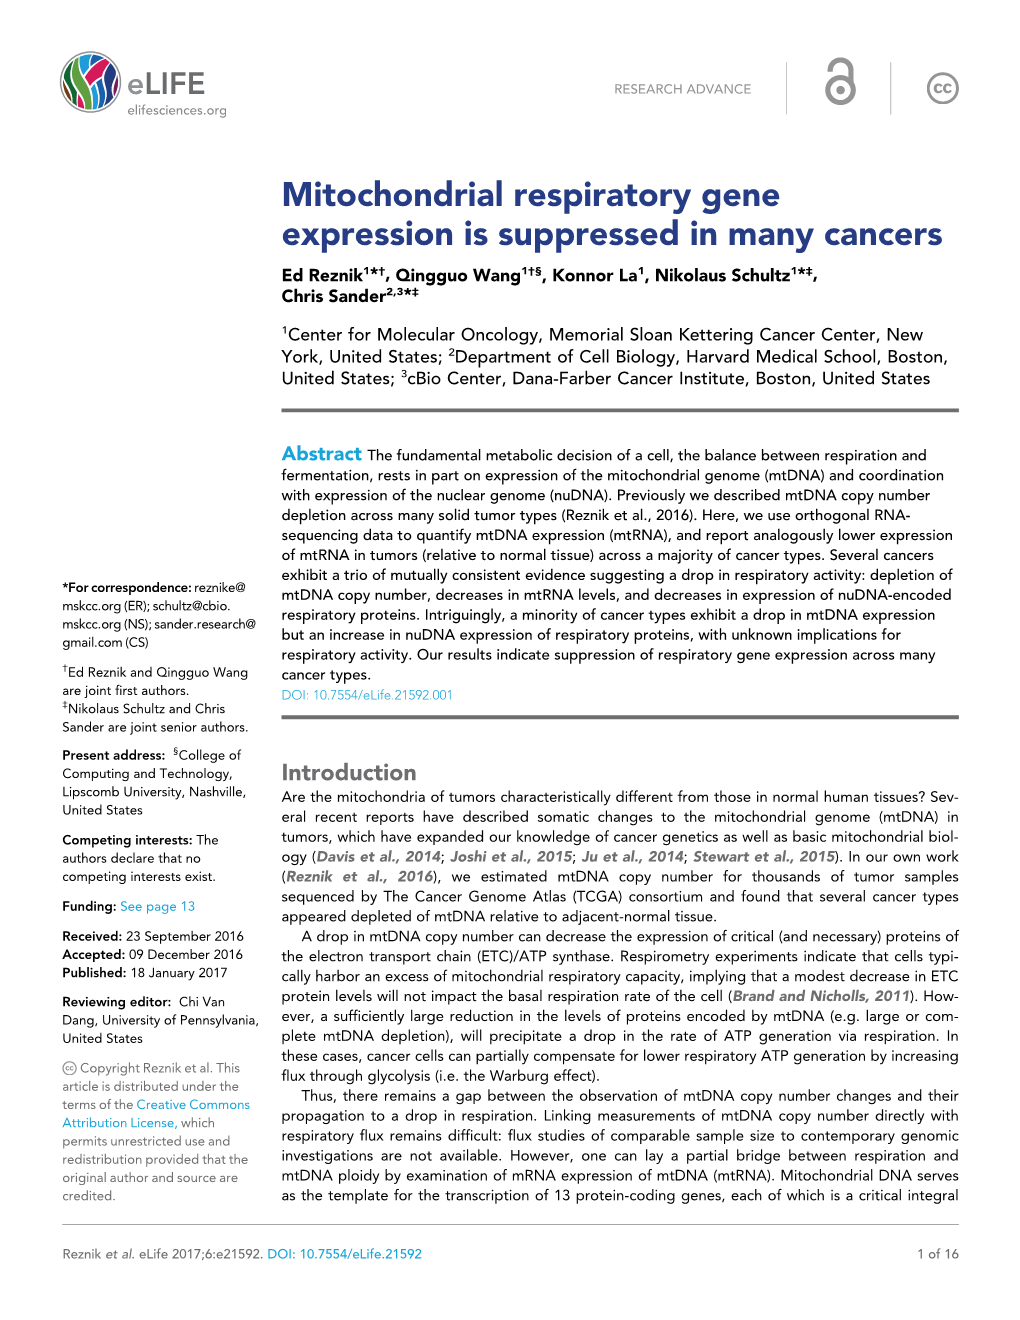 Mitochondrial Respiratory Gene Expression Is Suppressed in Many Cancers Ed Reznik1*†, Qingguo Wang1†§, Konnor La1, Nikolaus Schultz1*‡, Chris Sander2,3*‡